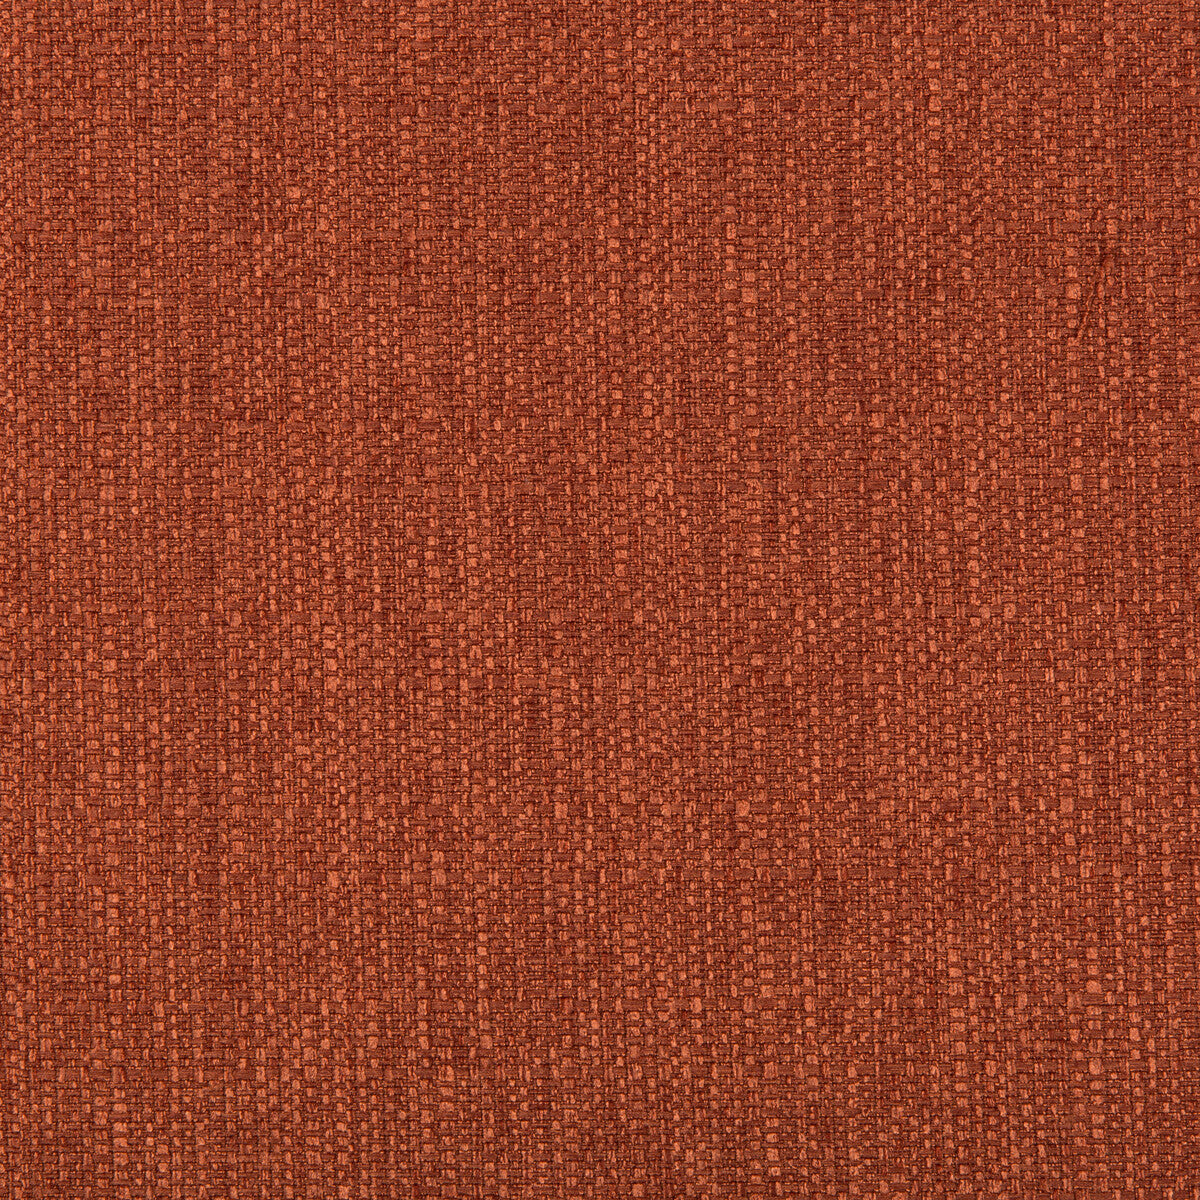 Kravet Contract fabric in 35472-24 color - pattern 35472.24.0 - by Kravet Contract